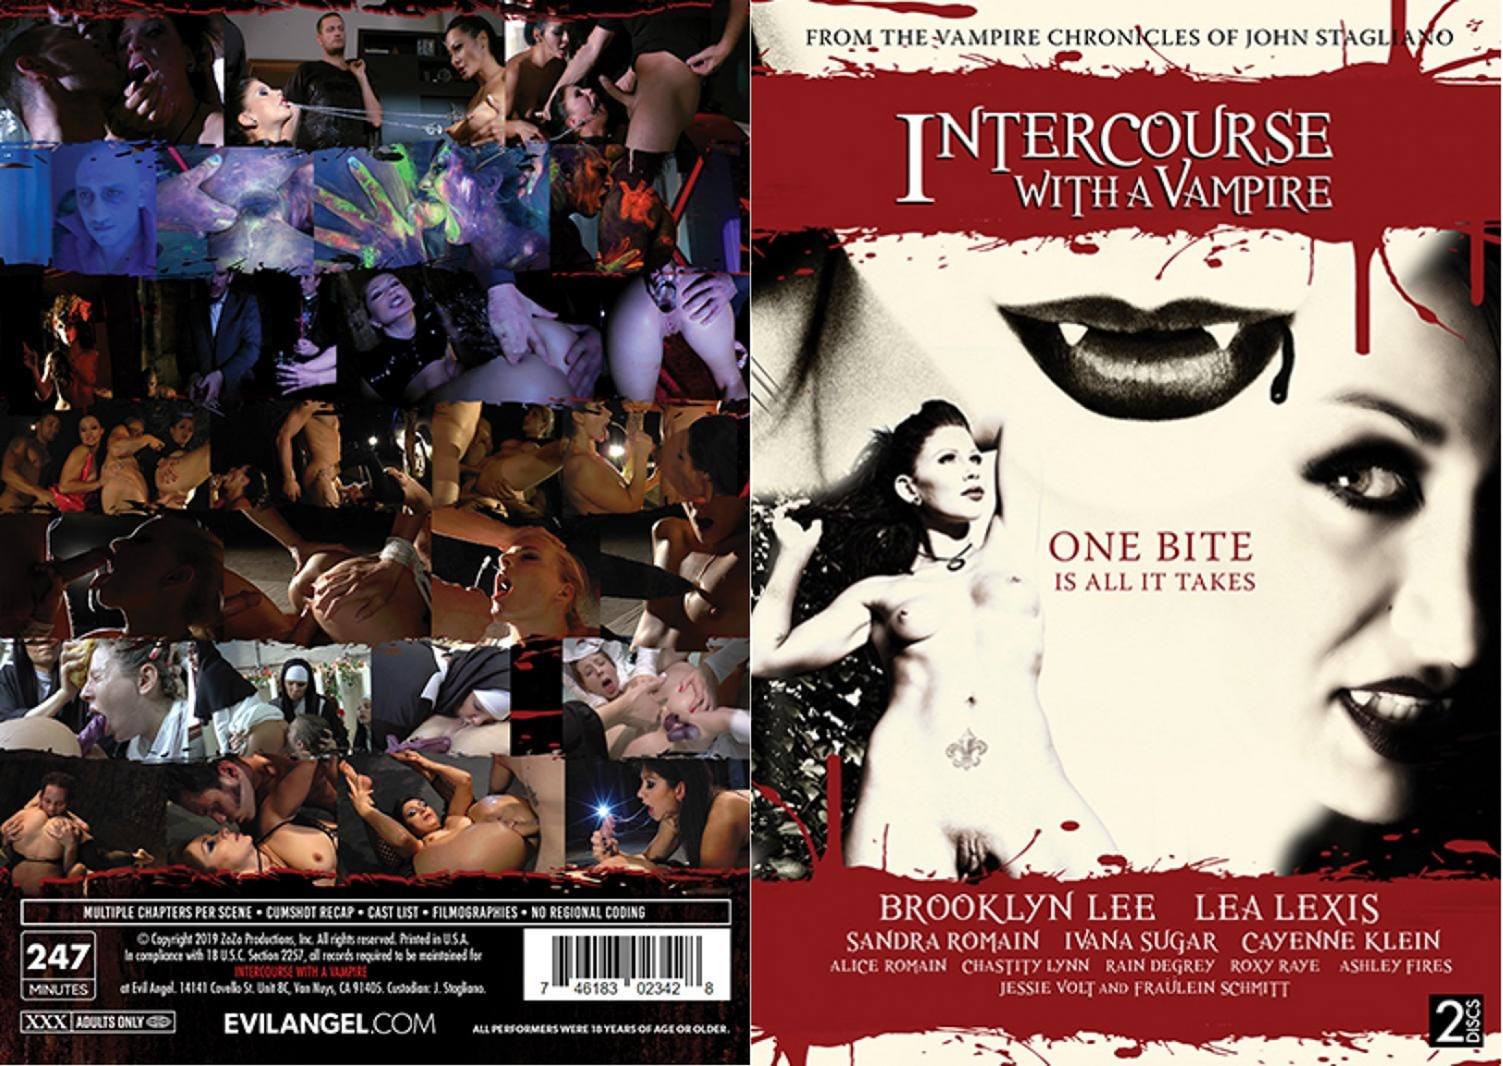 Intercourse with a vampire